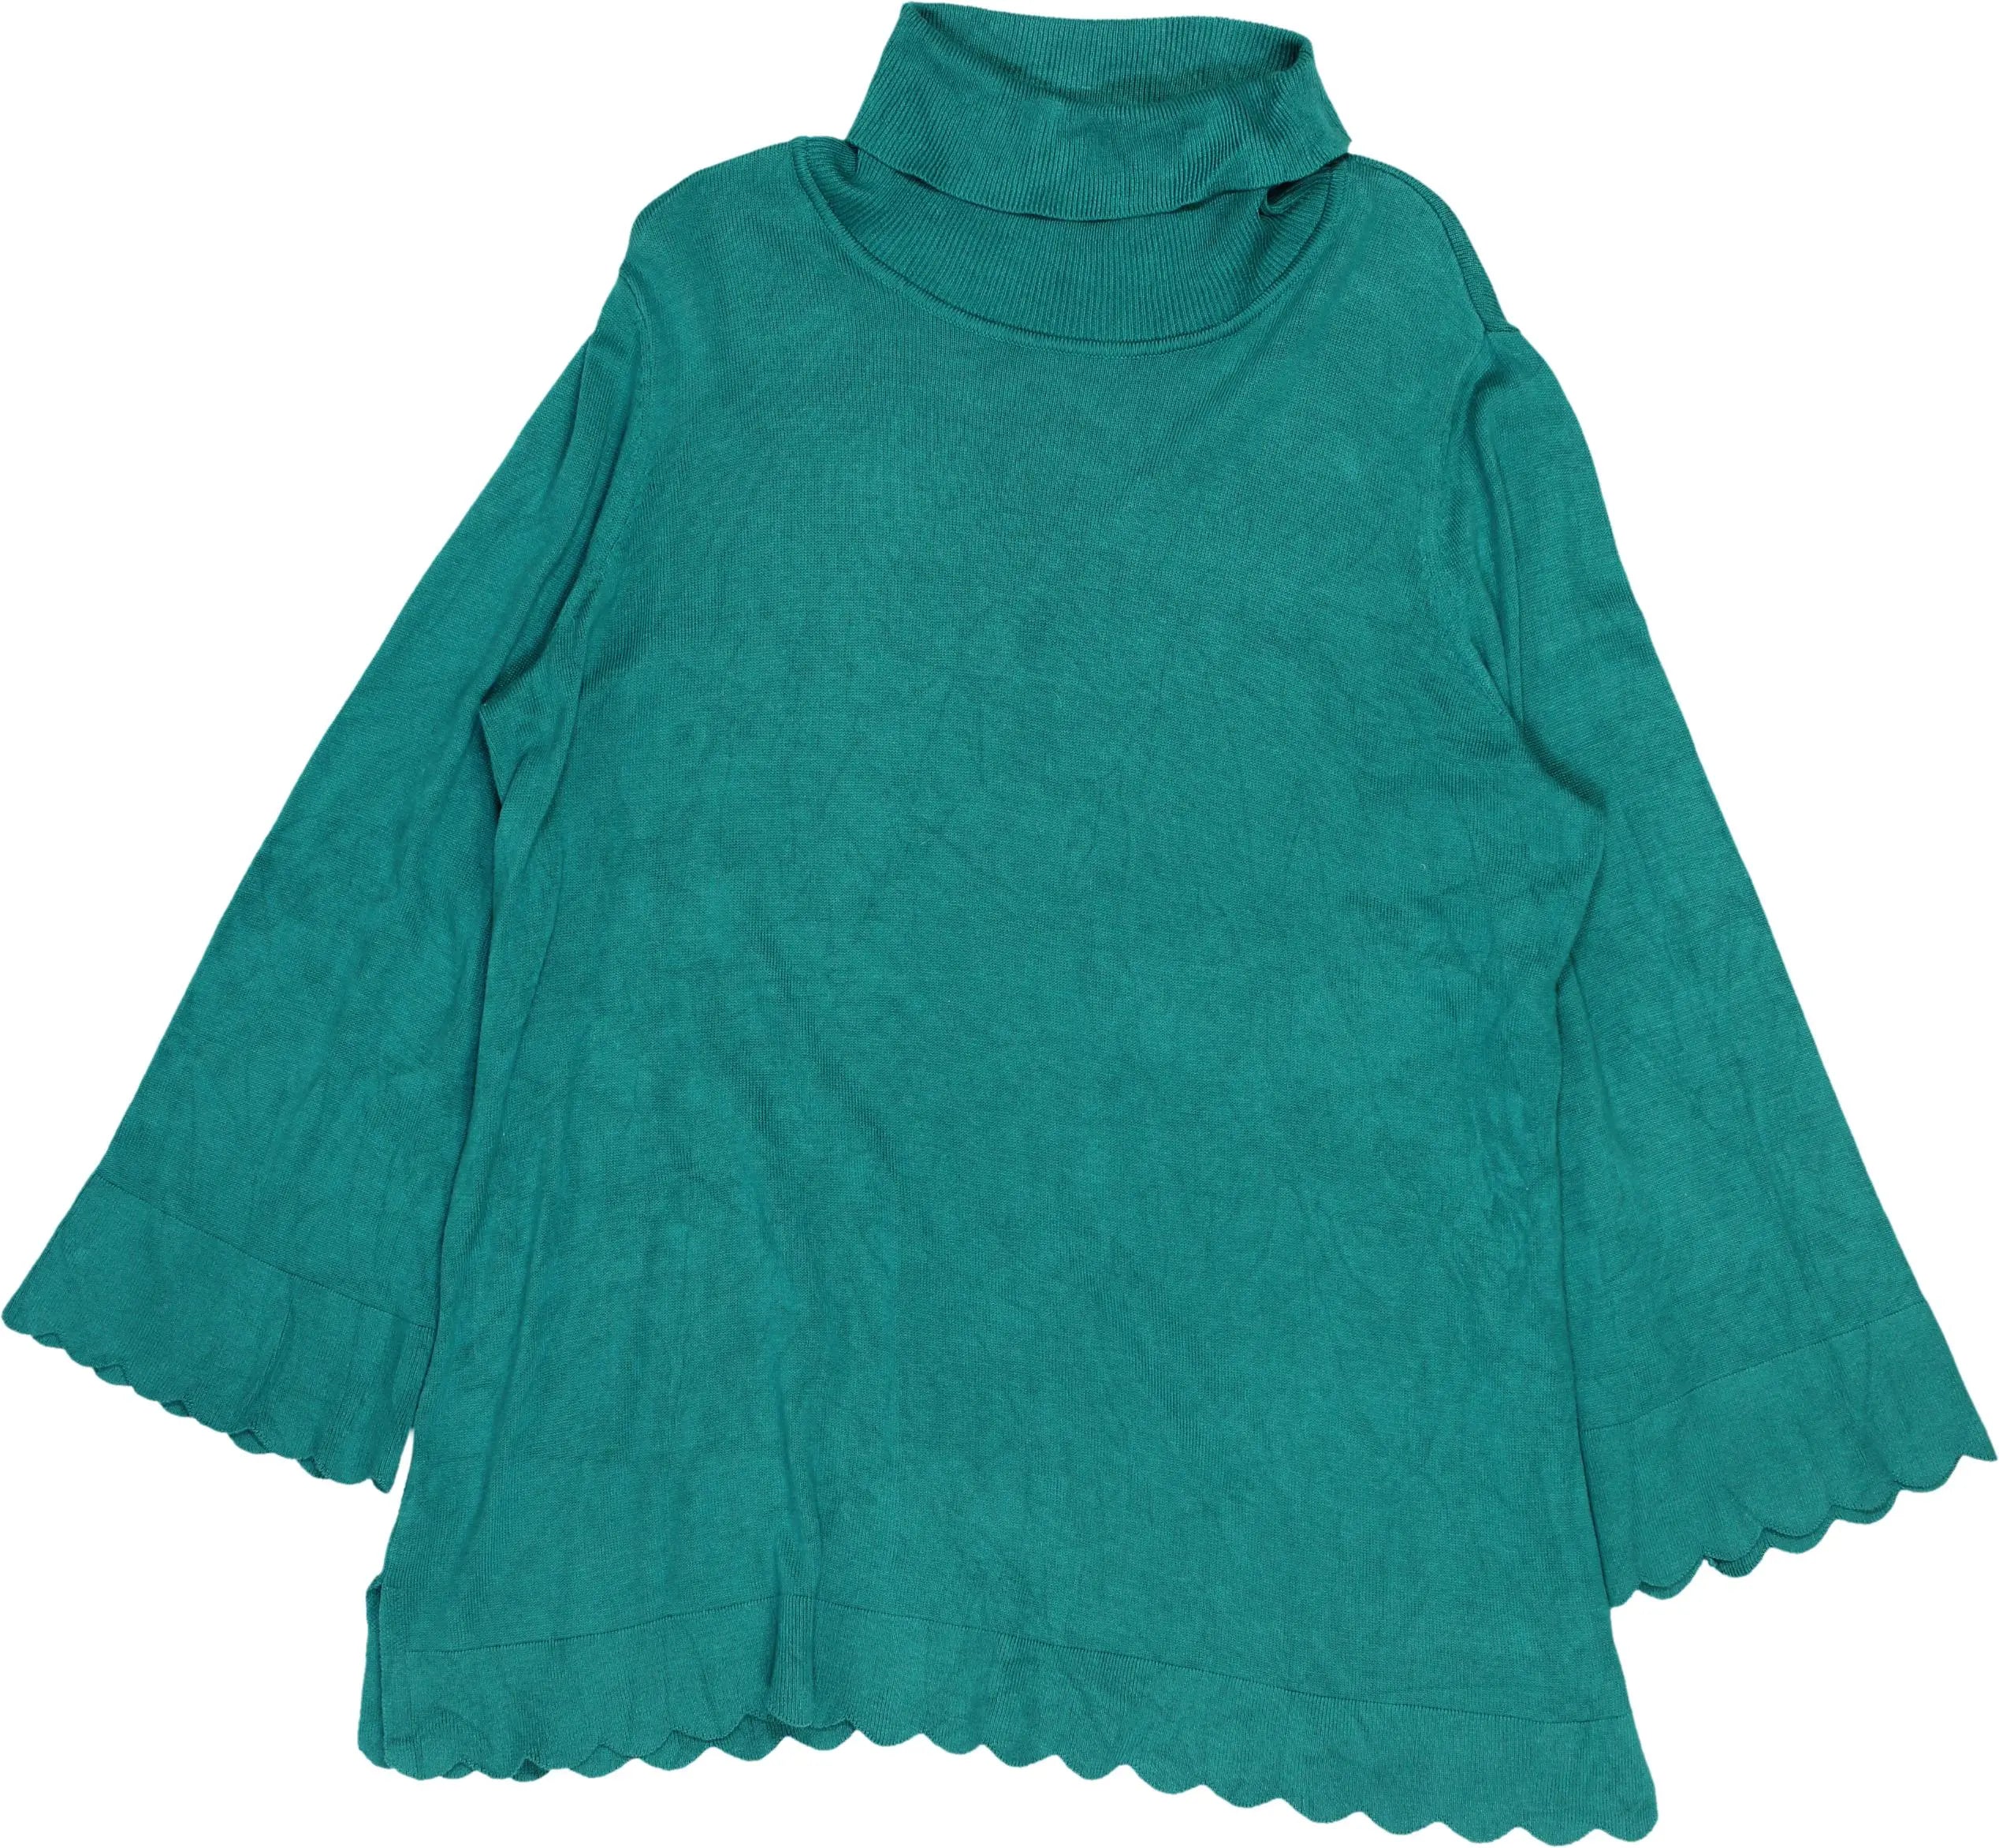 Isaac Mizrahi - Teal green turtleneck- ThriftTale.com - Vintage and second handclothing